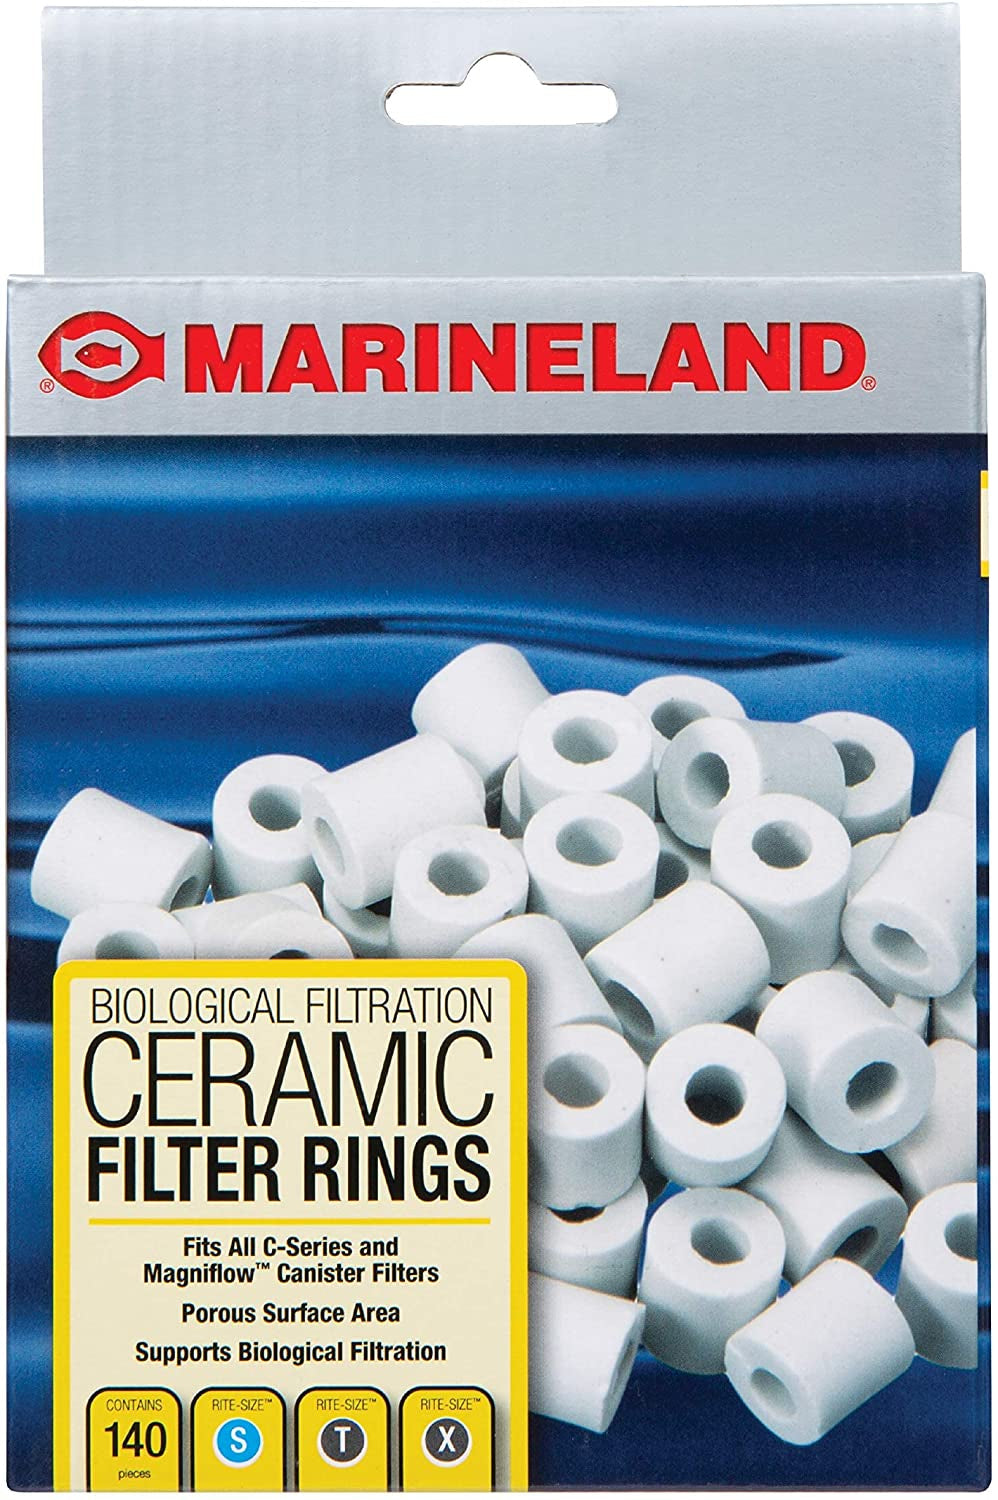 Marineland Ceramic Filter Rings for C-Series and Magniflow Filters Aquariums For Beginners